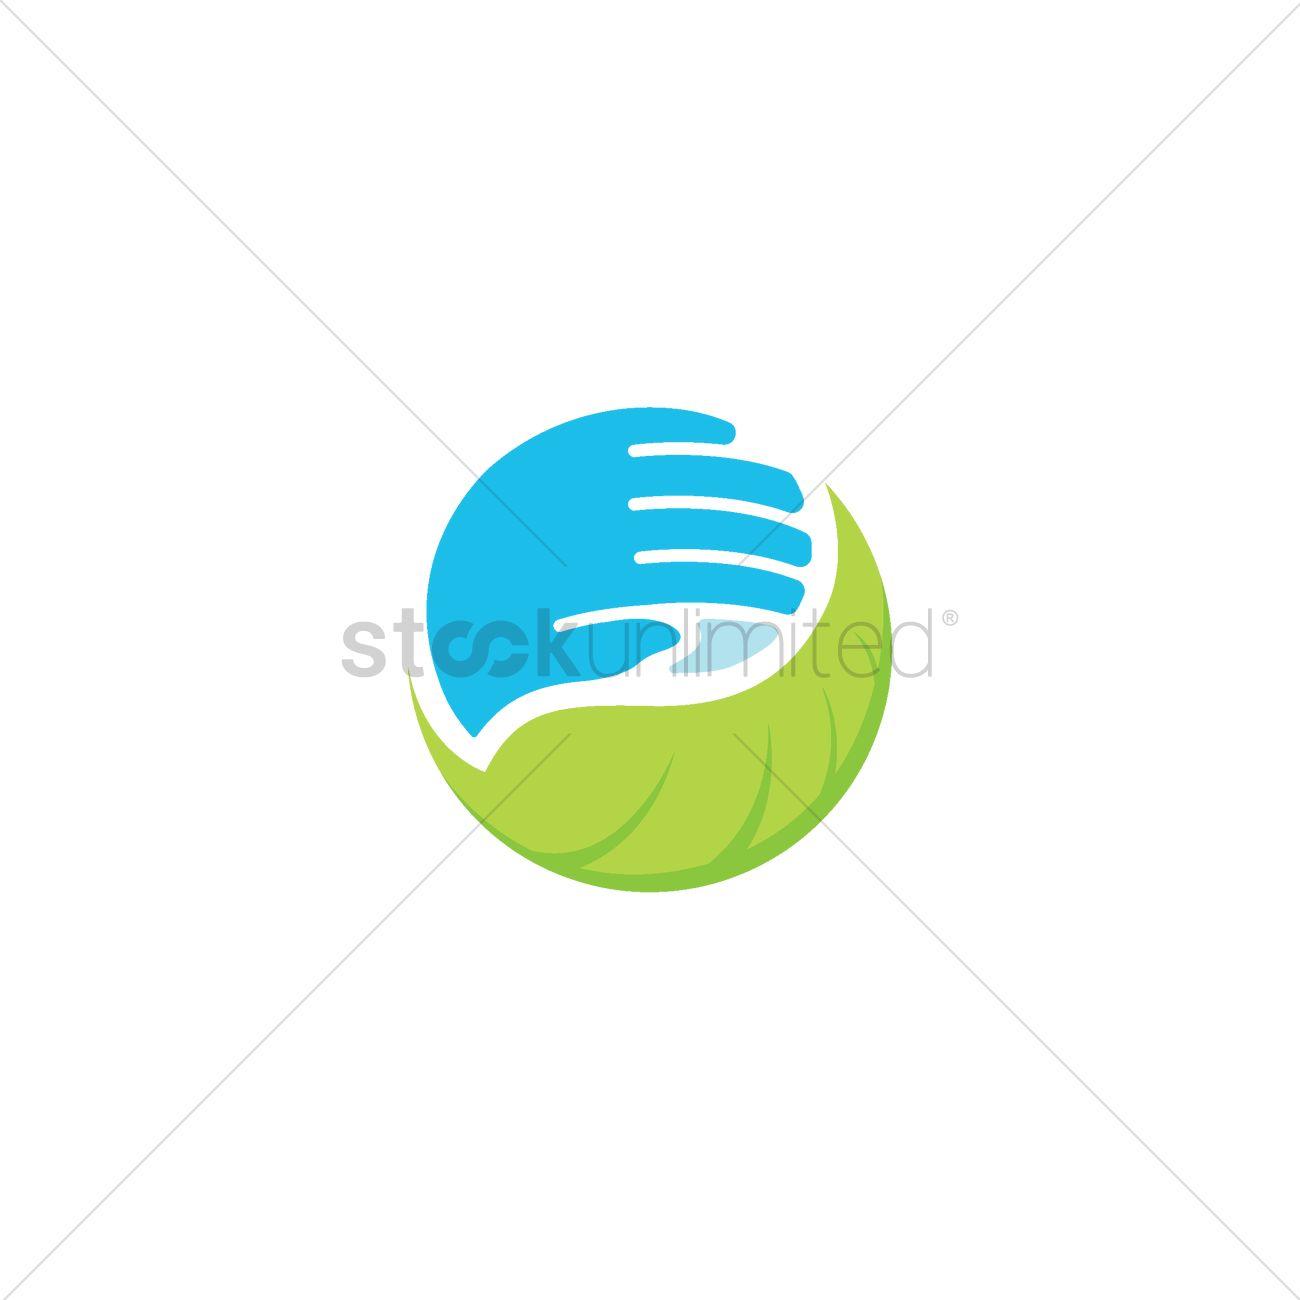 Flags World Globe Logo - Globe logo element with ecological concept Vector Image